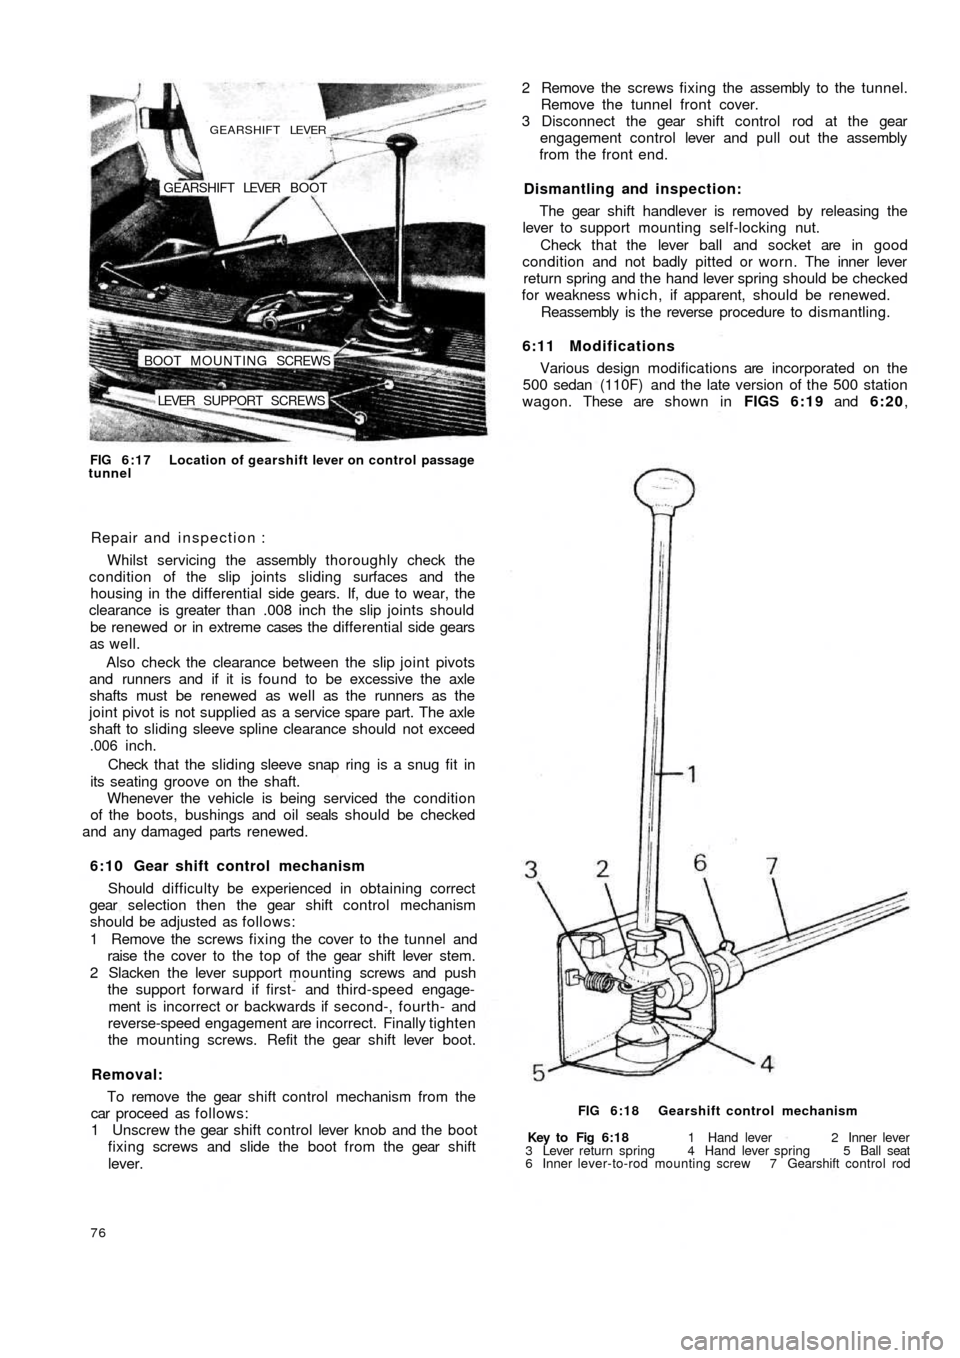 FIAT 500 1970 1.G User Guide LEVER  SUPPORT SCREWS BOOT MOUNTING SCREWSGEARSHIFT LEVER  BOOT
GEARSHIFT LEVER
FIG 6:17 Location of gearshift lever on control  passage
tunnel
Repair and inspection :
Whilst servicing the assembly th